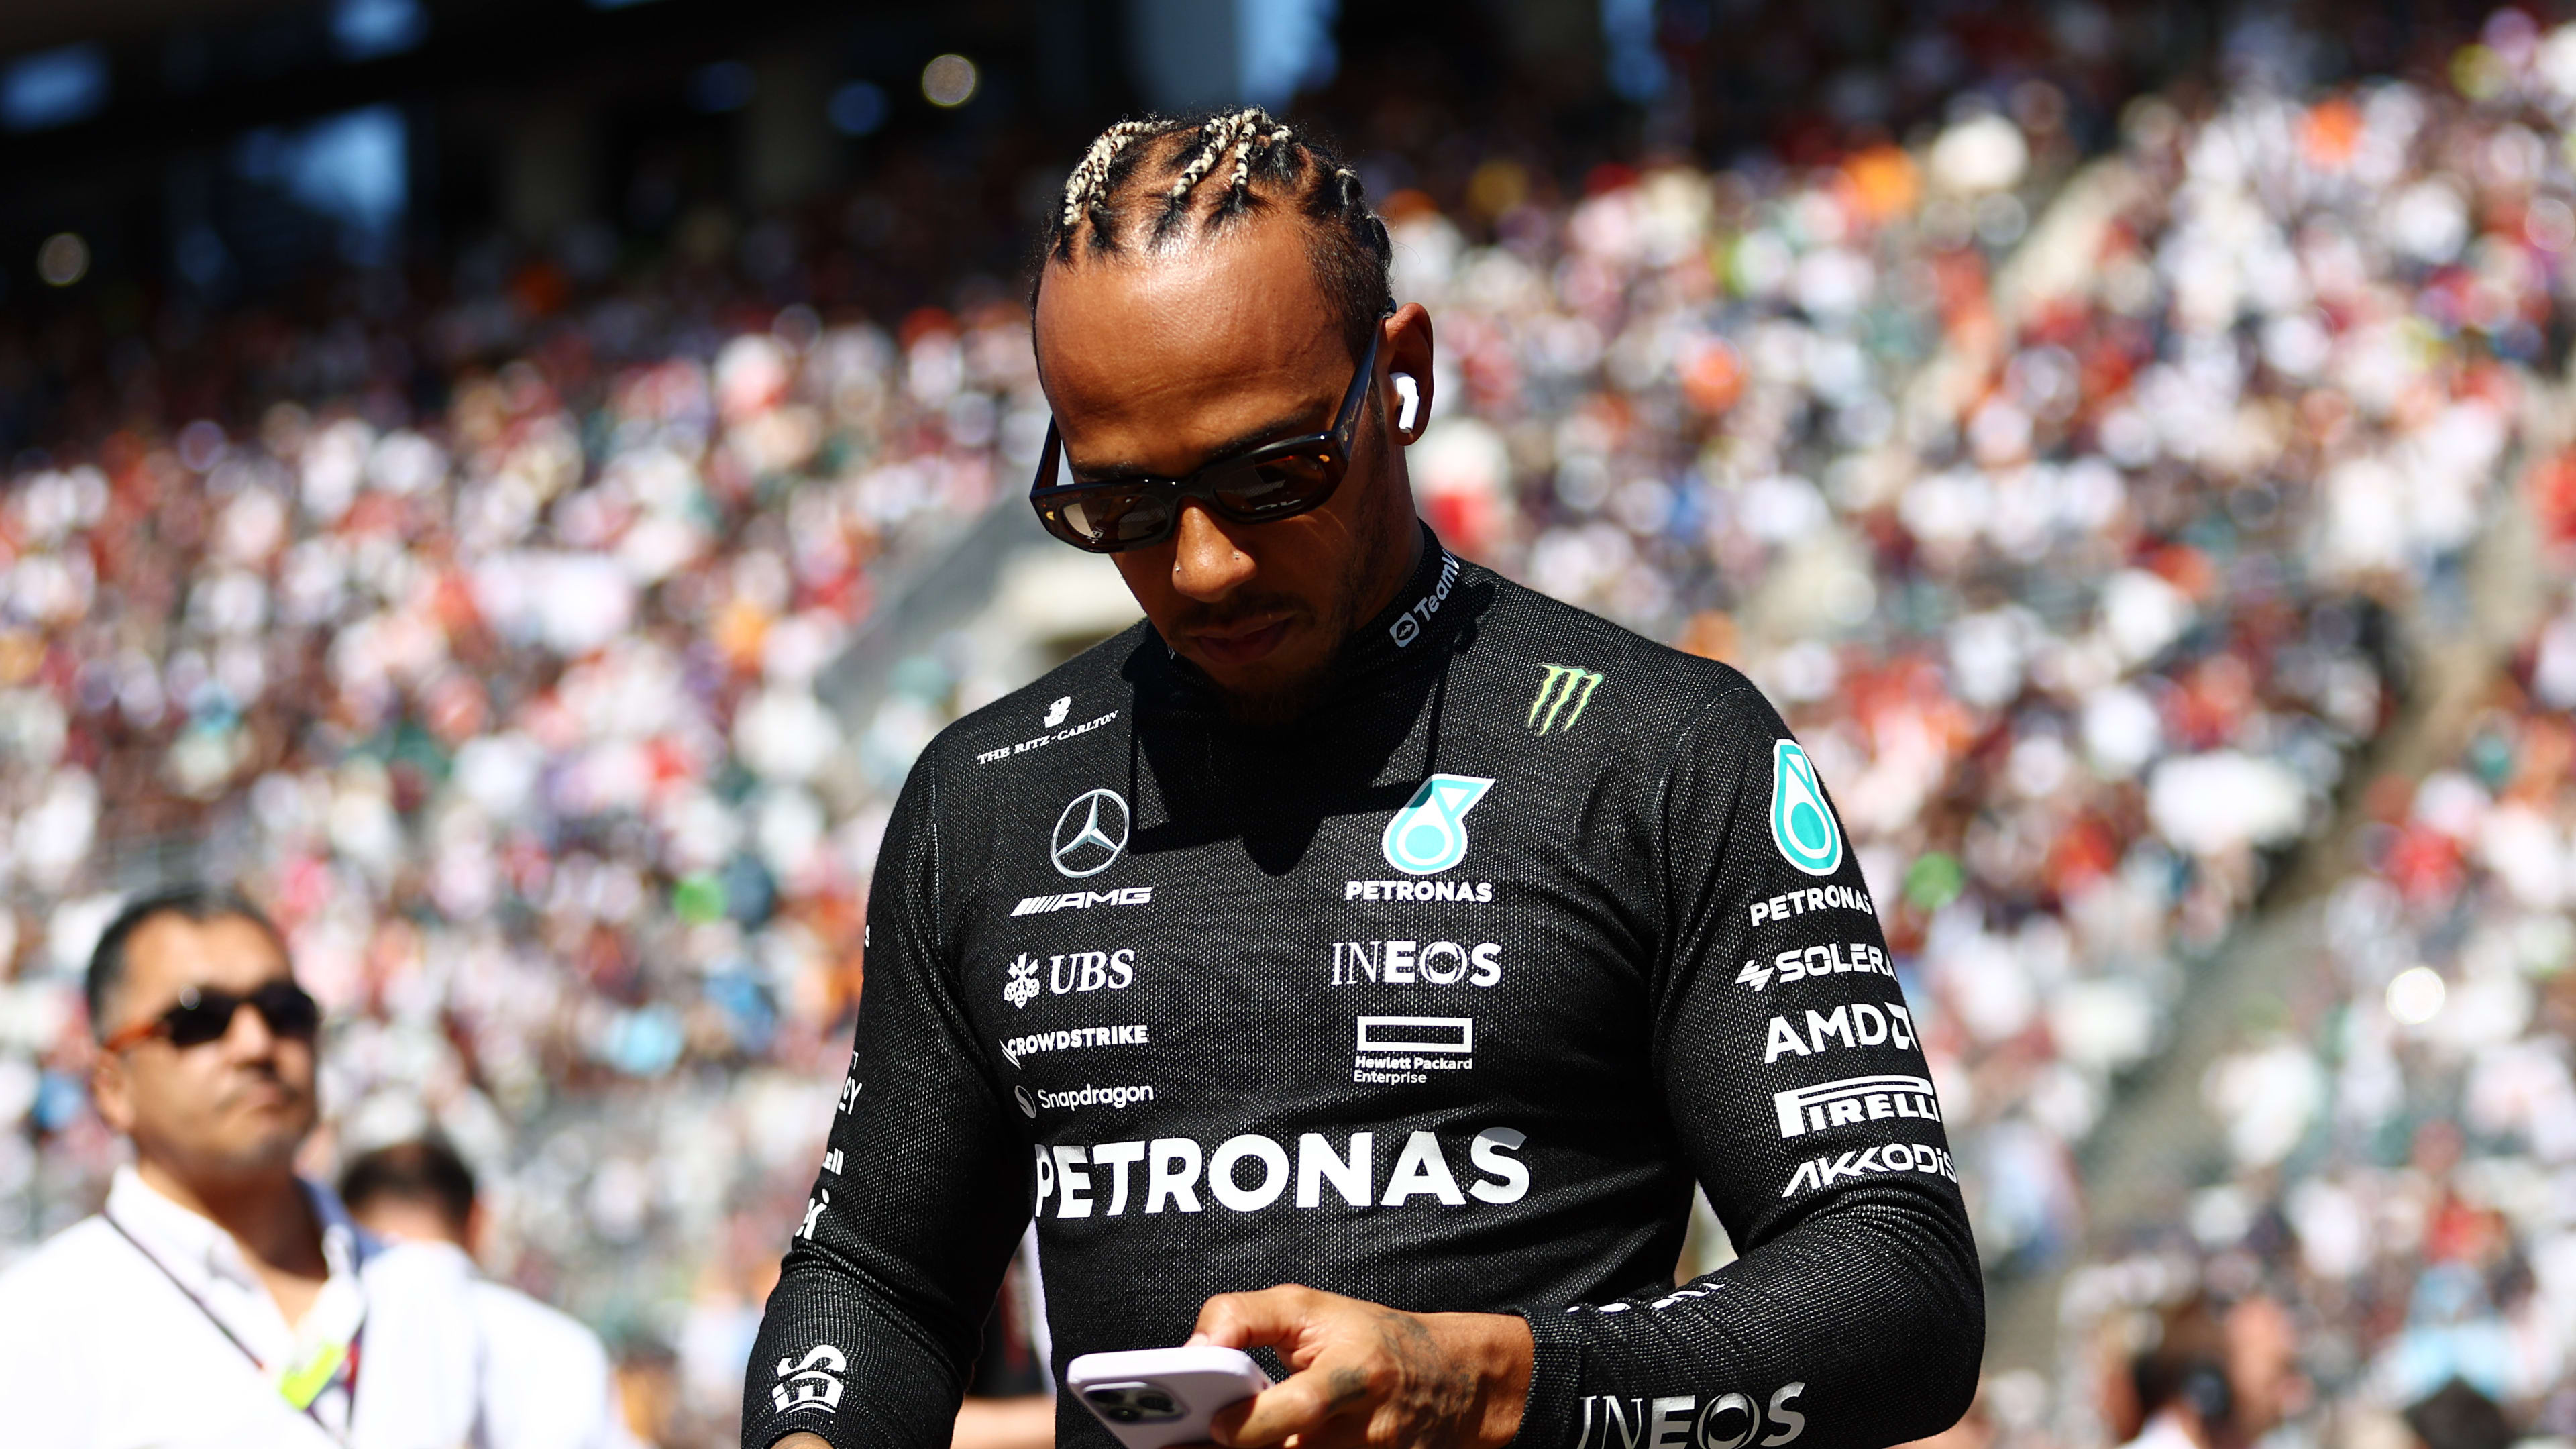 SUZUKA, JAPAN - SEPTEMBER 24: Lewis Hamilton of Great Britain and Mercedes prepares to drive on the